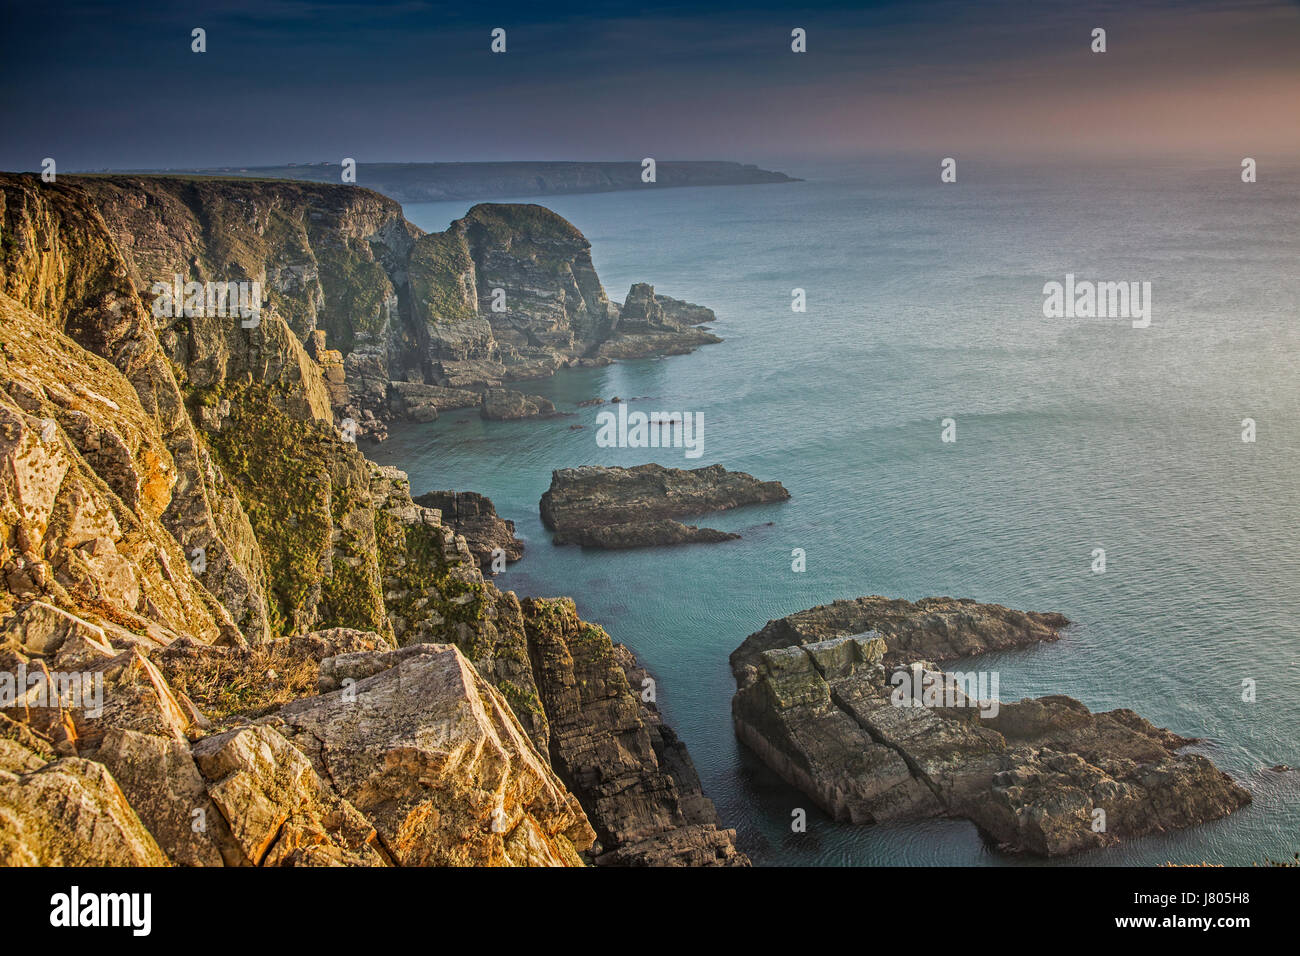 Craggy cliffs overlooking ocean, South Stack cliffs, Anglesey, Wales Stock Photo